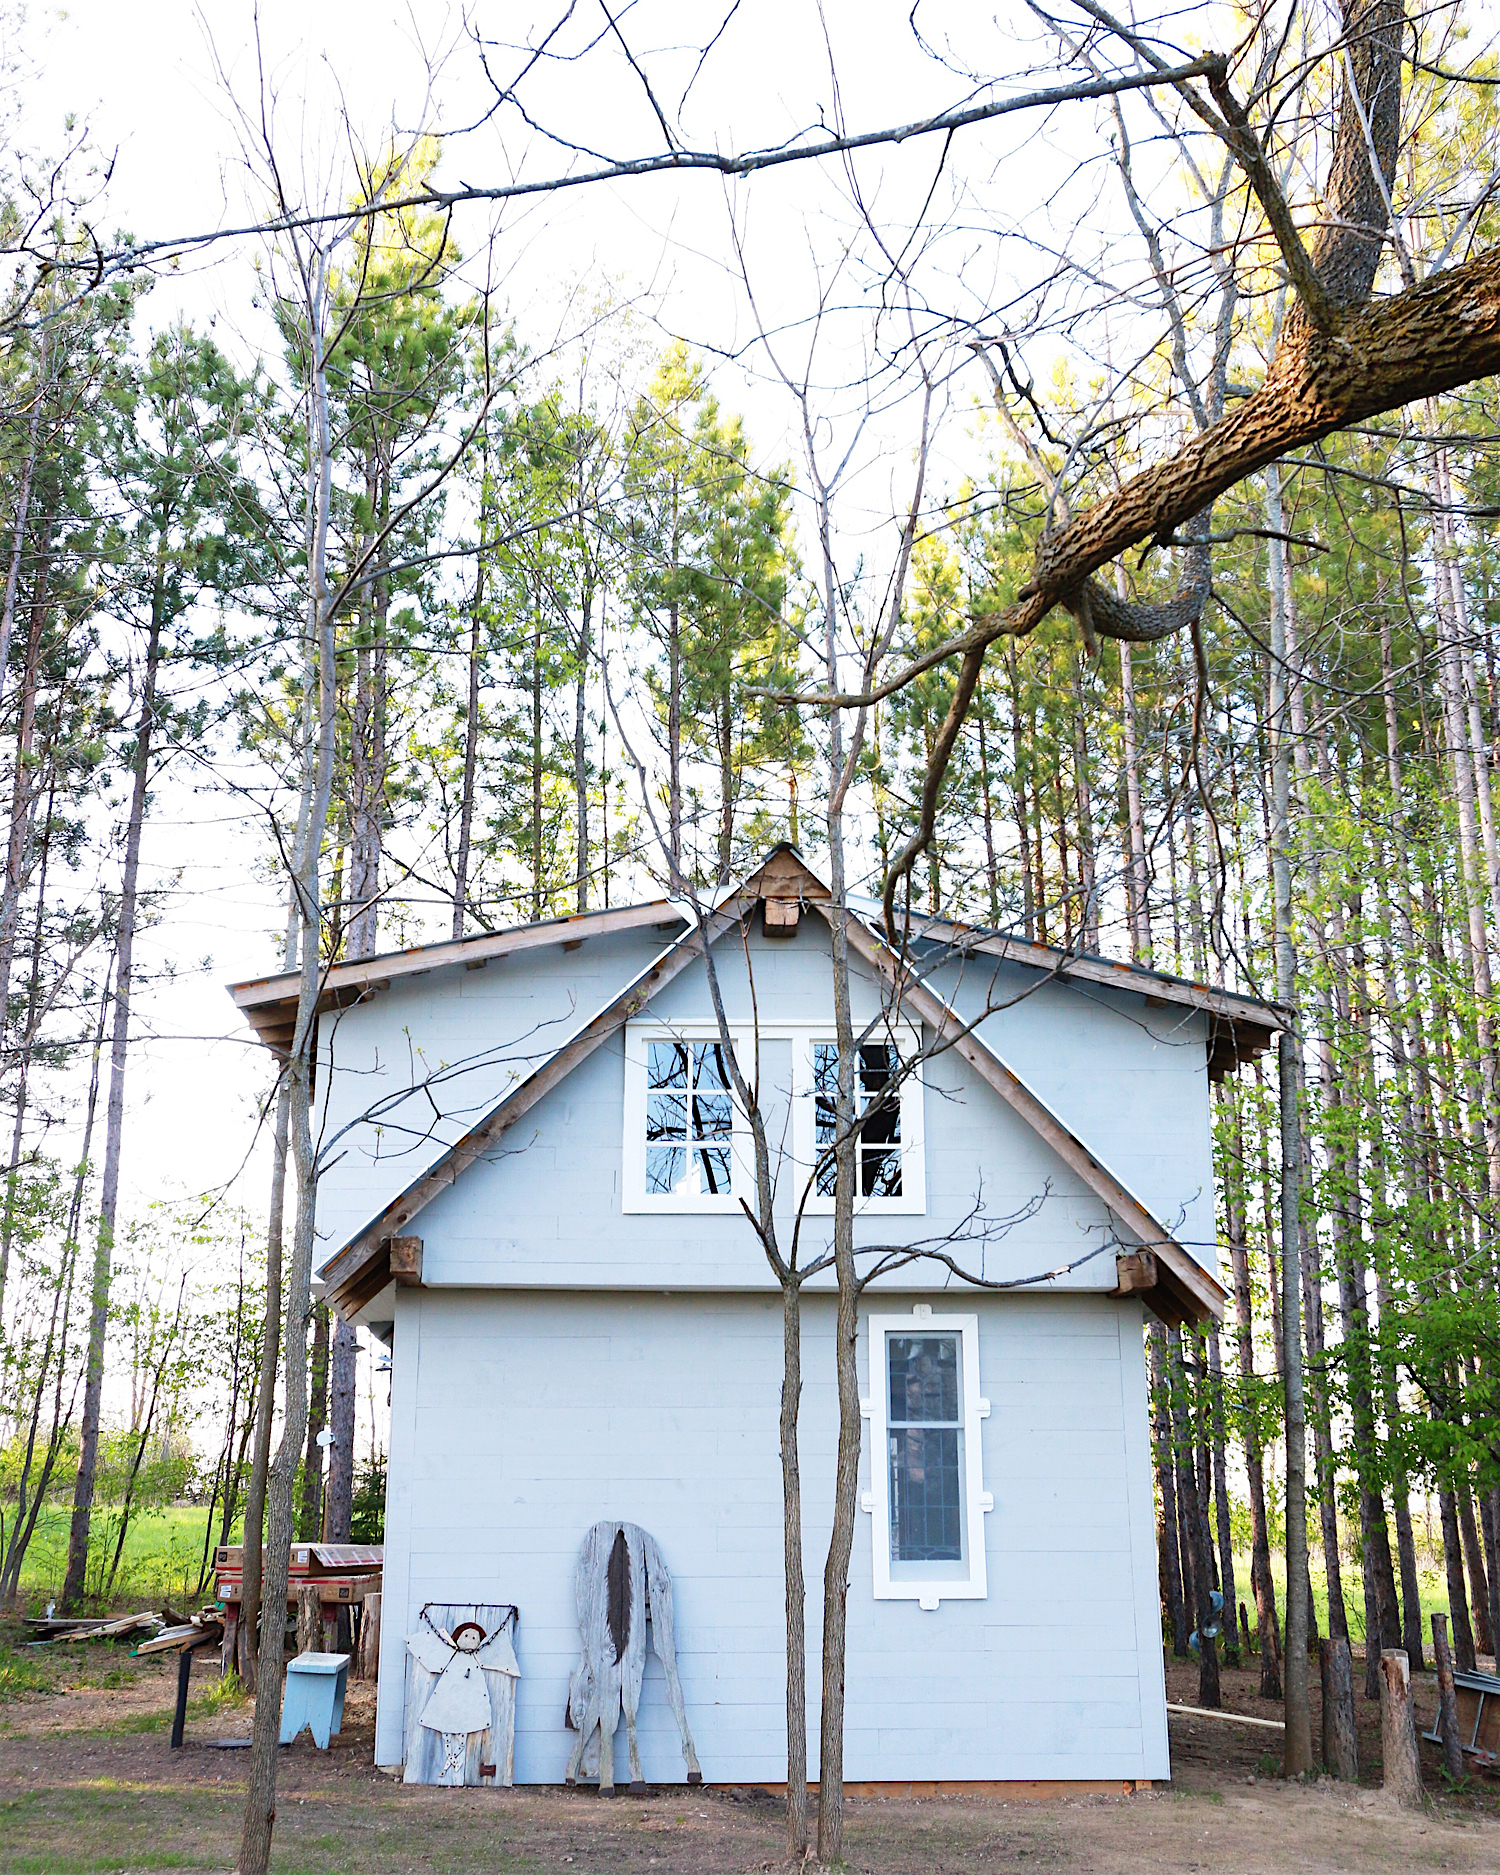 CABIN | Tiny house living | Rent the cabin! | DESIGN THE LIFE YOU WANT TO LIVE | Lynne Knowlton